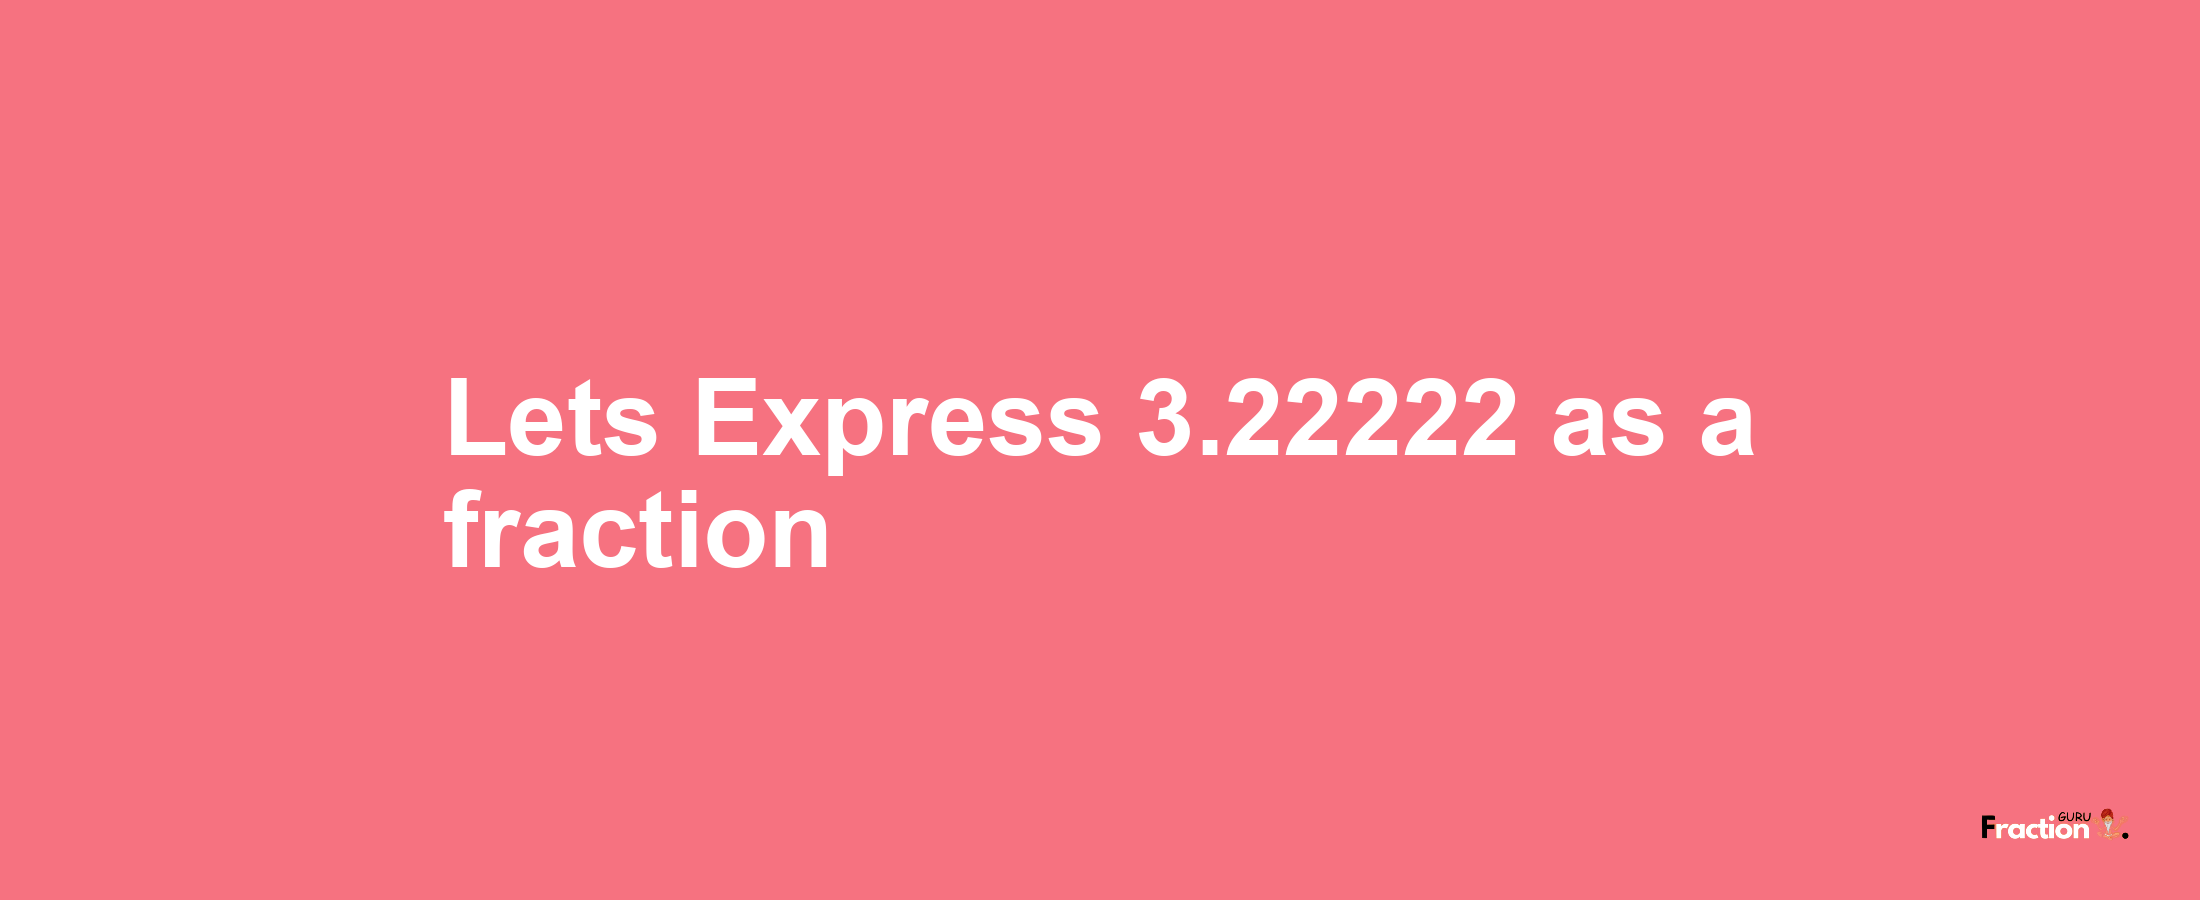 Lets Express 3.22222 as afraction